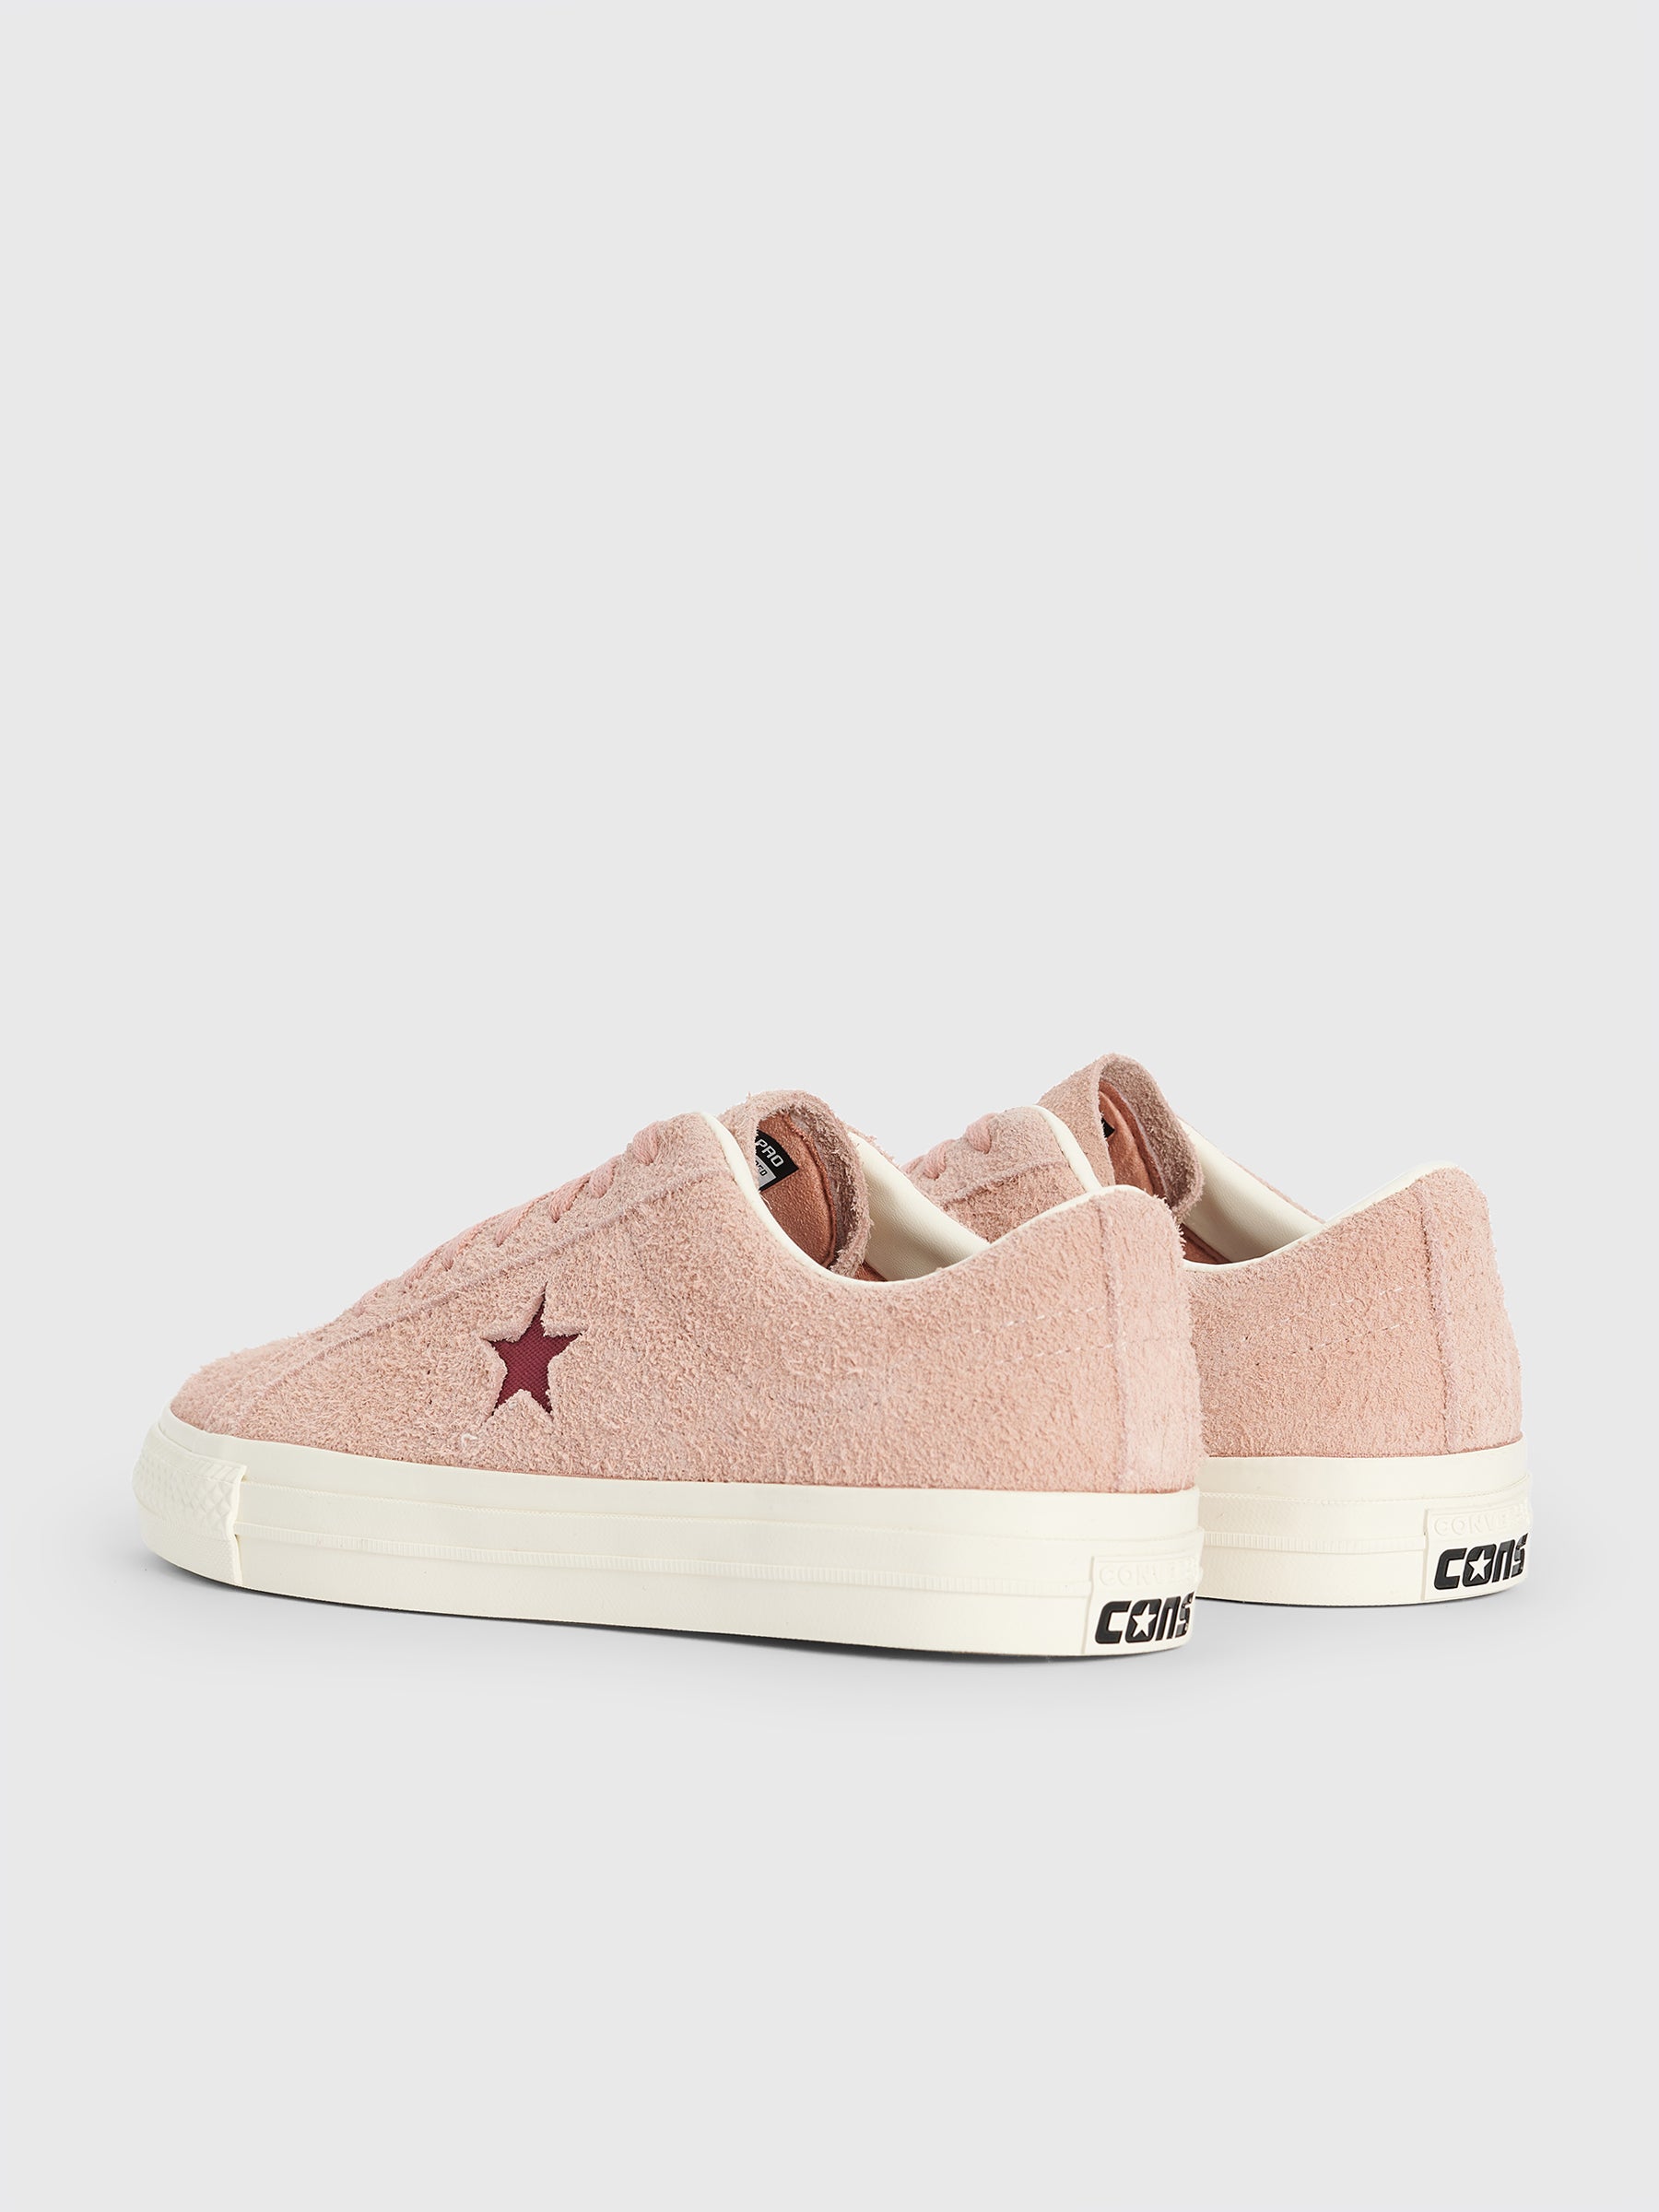 Converse Cons One Star Pro OX Canyon Dusk / Cherry Vision